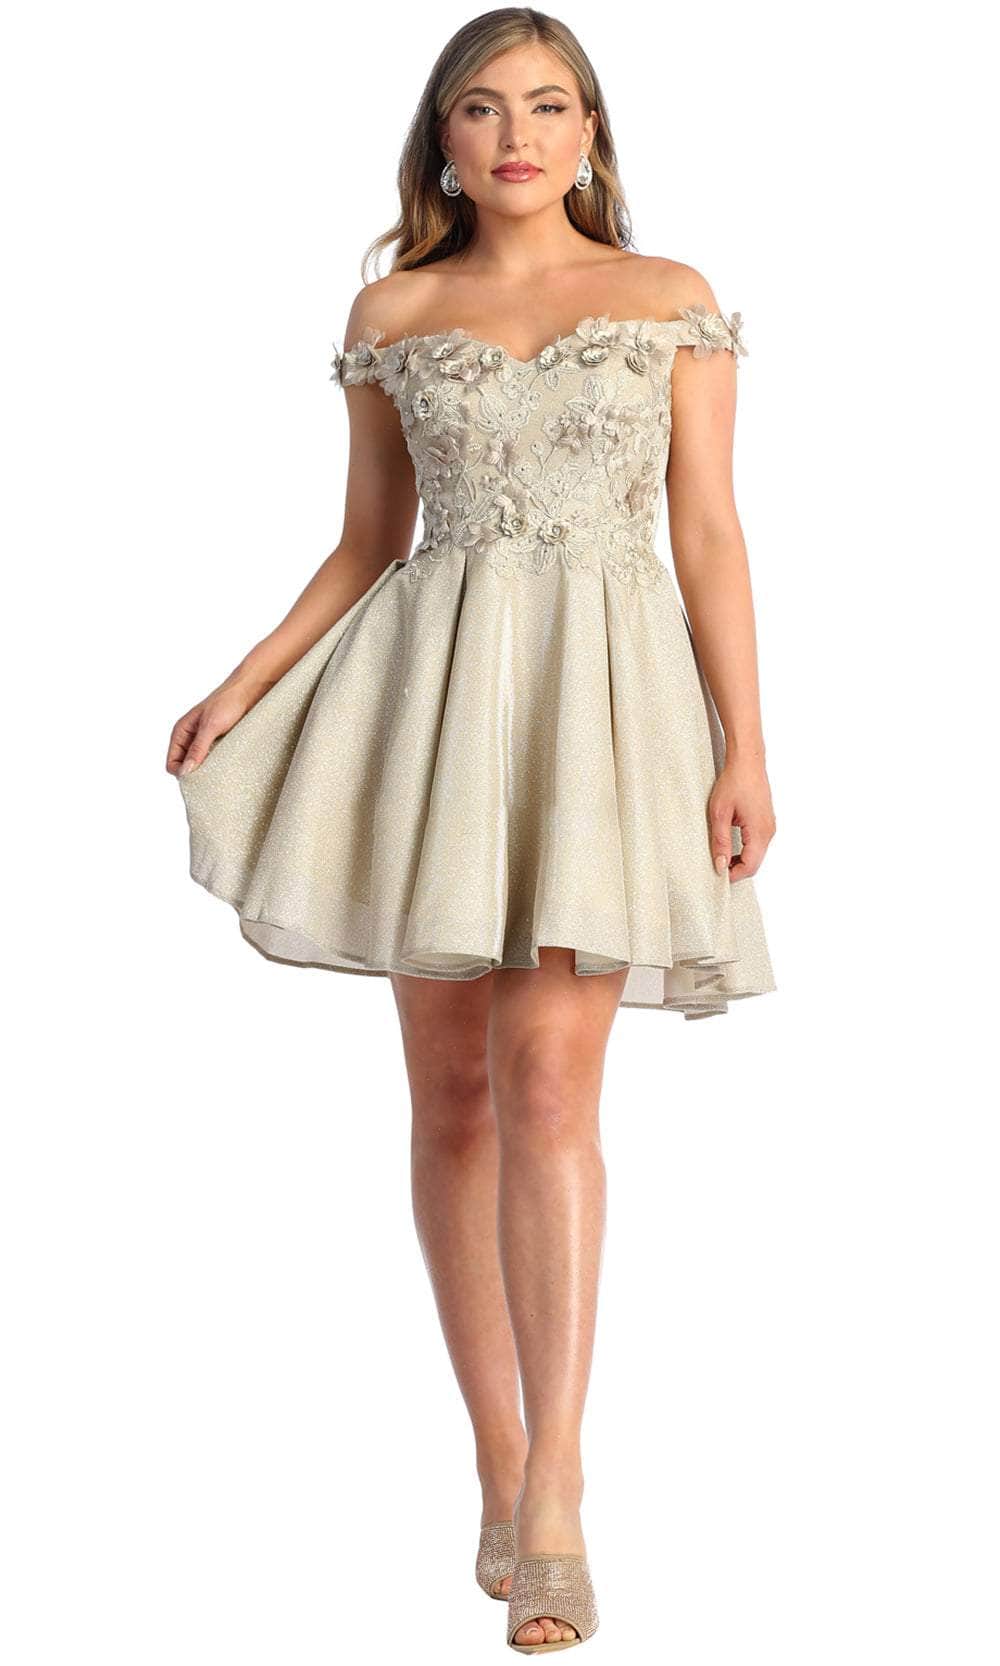 May Queen MQ1906 - Floral Appliqued Sweetheart Cocktail Dress